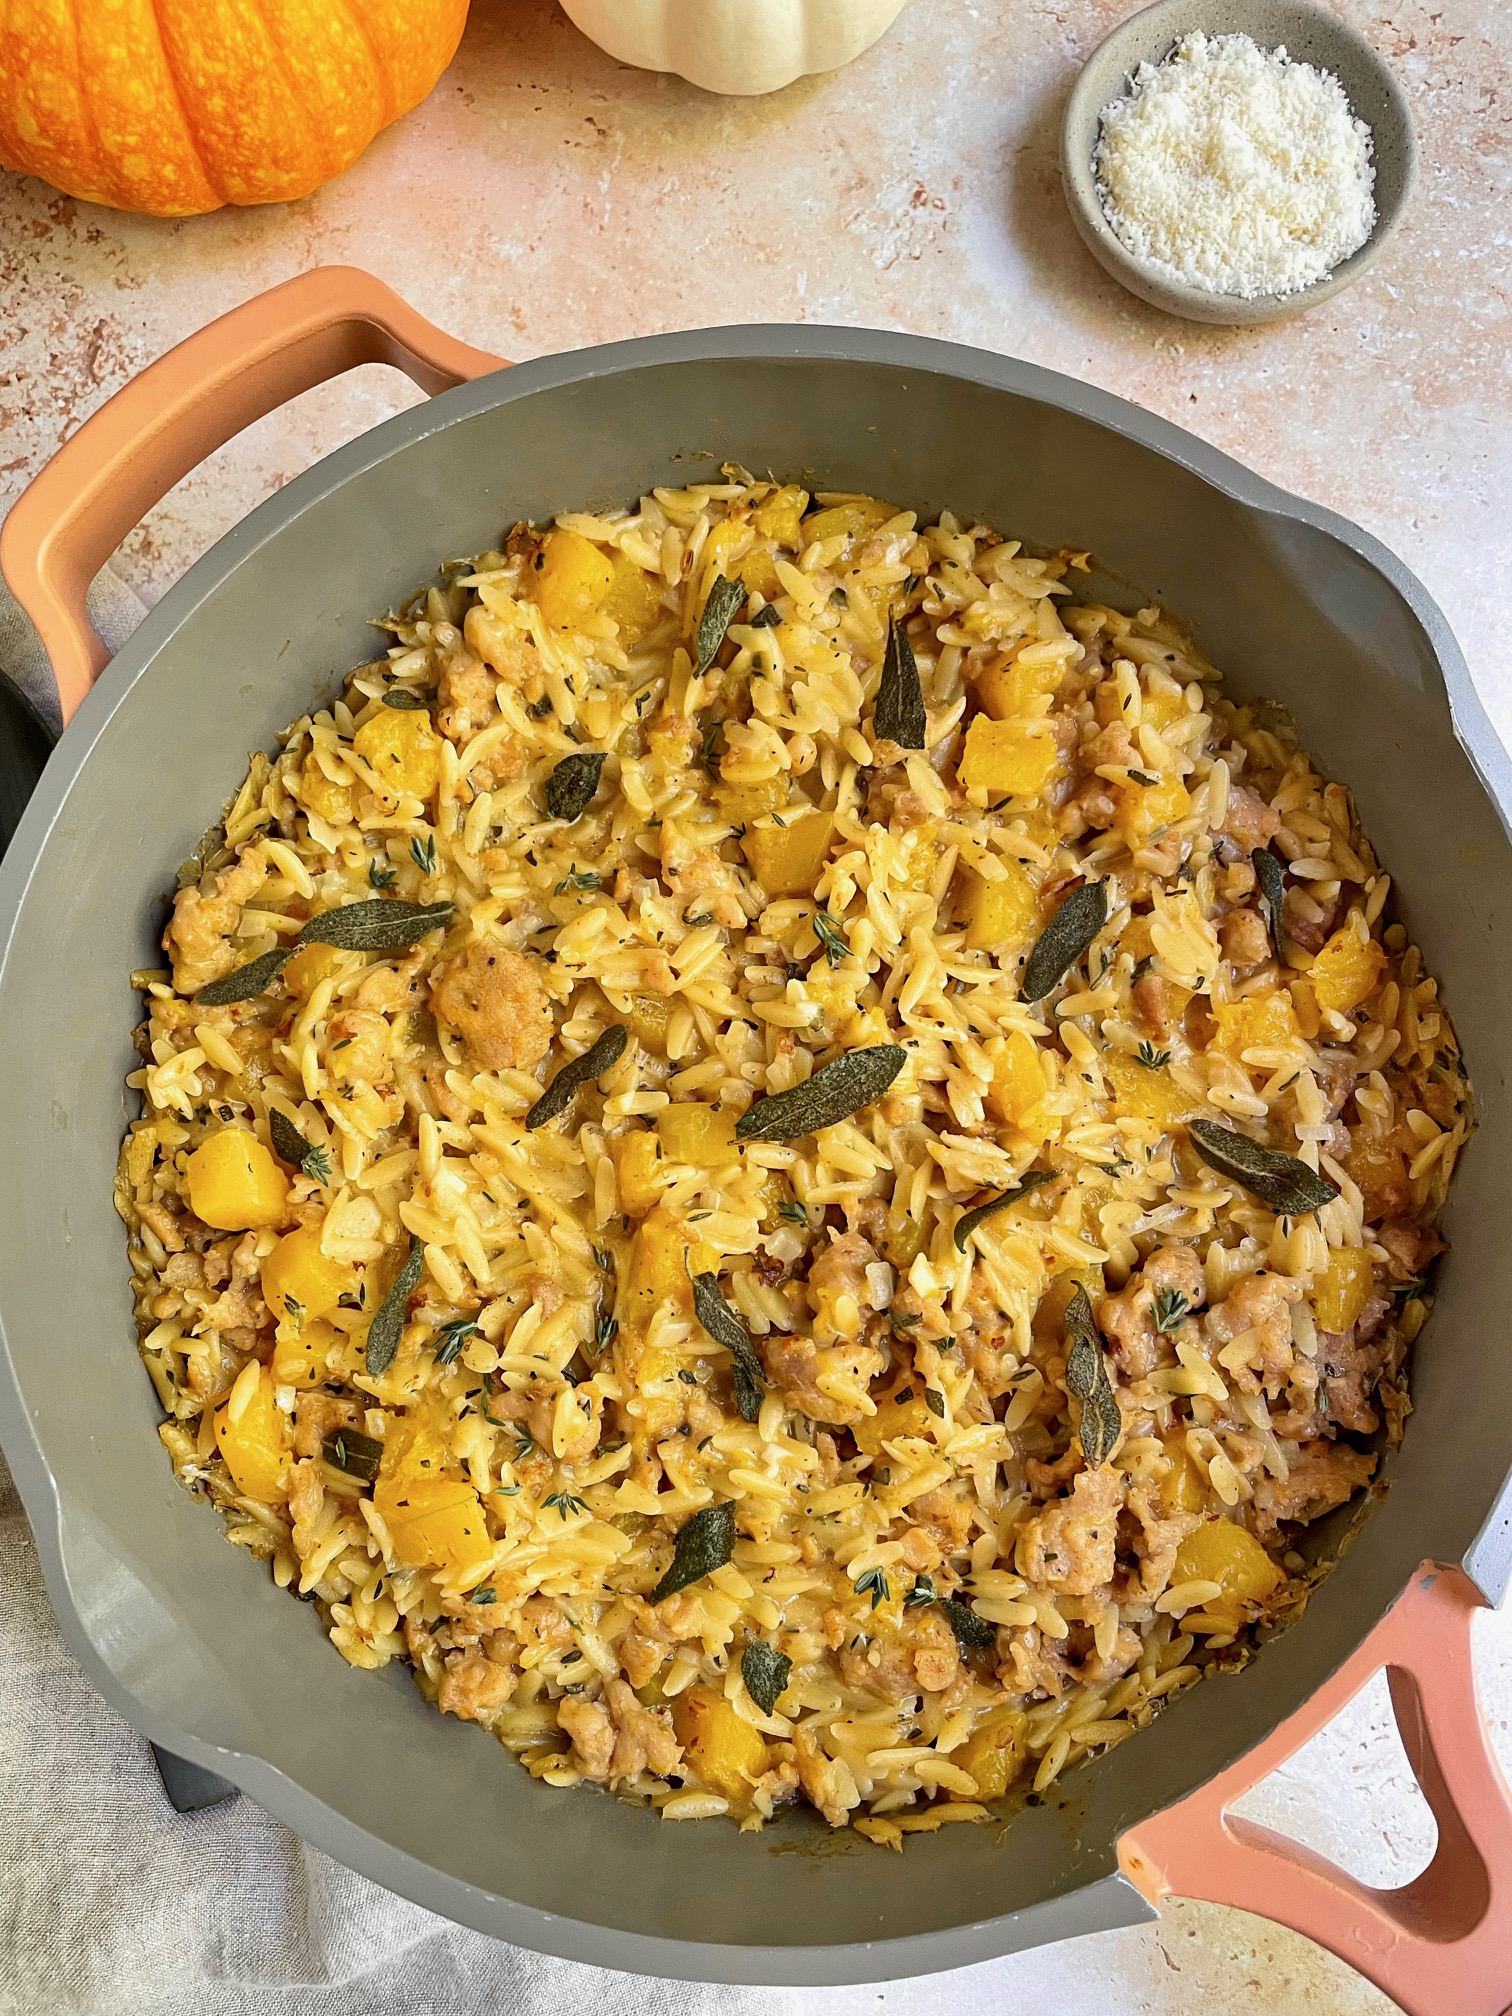 The finished butternut squash sausage orzo in the pan with a small bowl of parmesan cheese next to it.